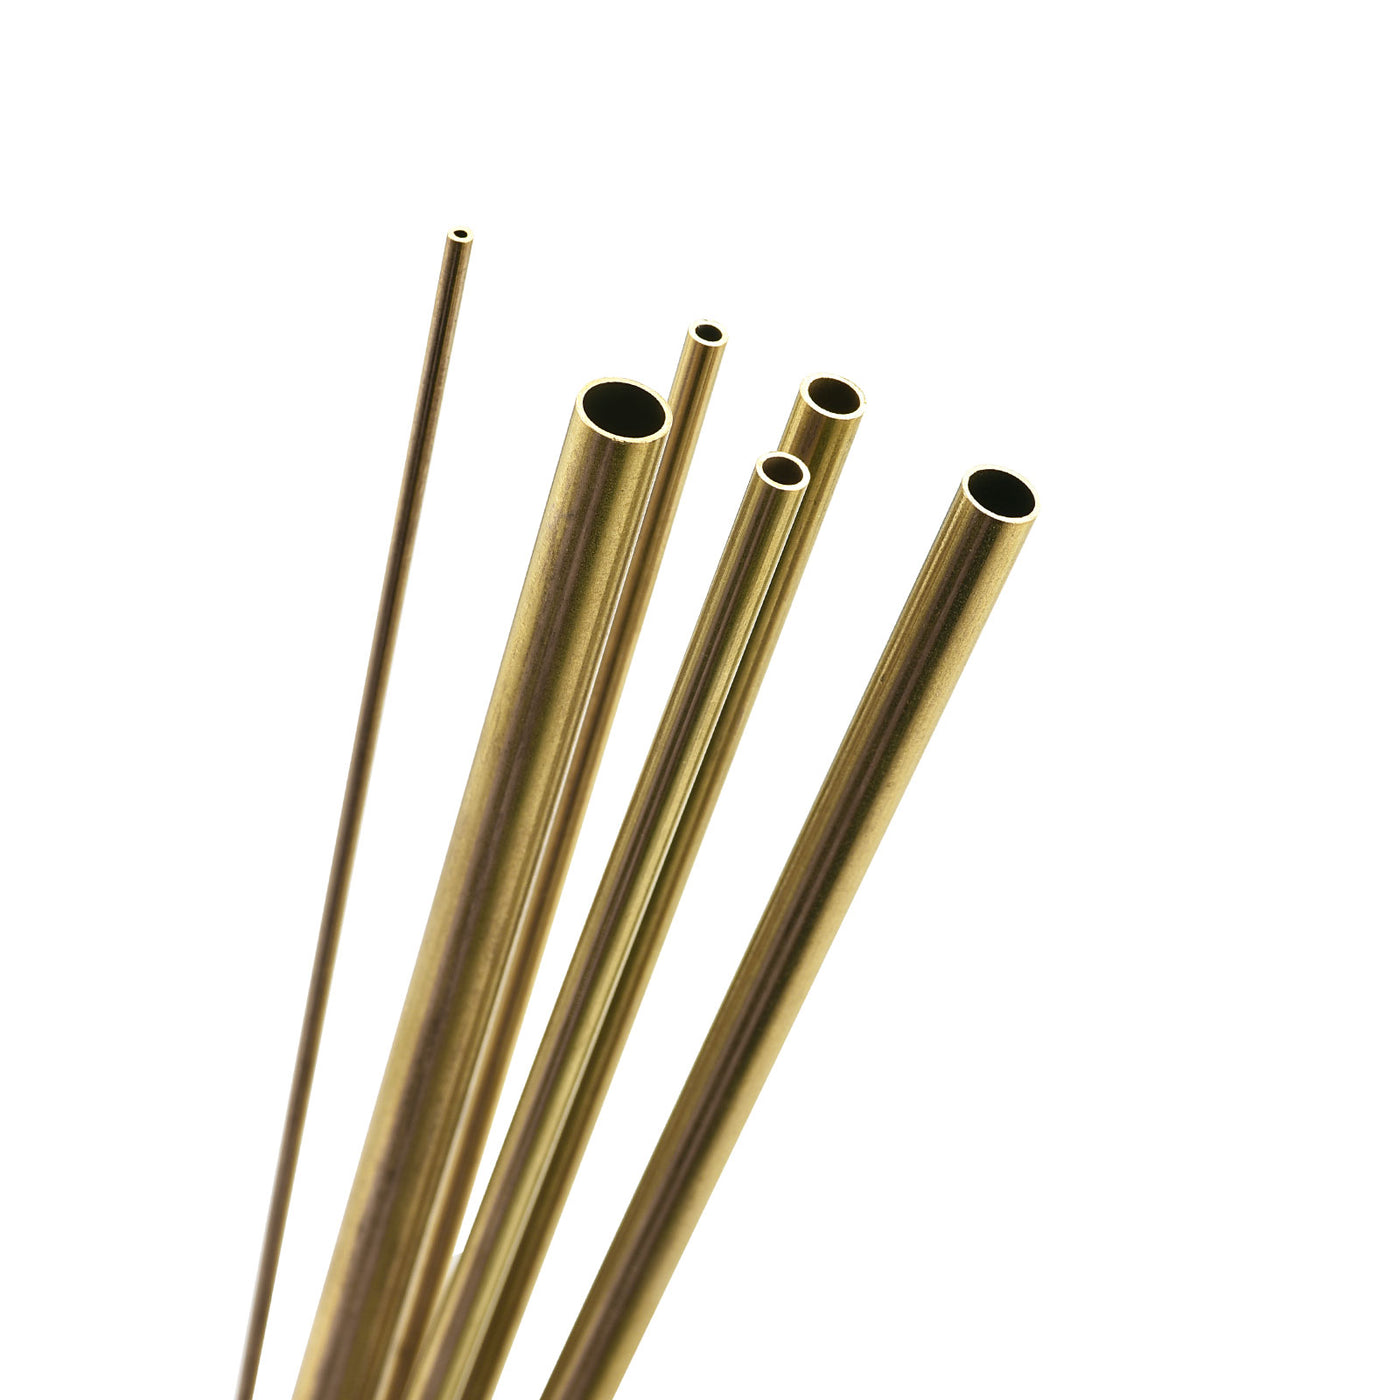 Uxcell Uxcell Brass Tube, 2mm 3mm 4mm 5mm 6mm 7mm OD x 0.5mm Wall Thickness 200mm Length Metal Tubing, Pack of 6